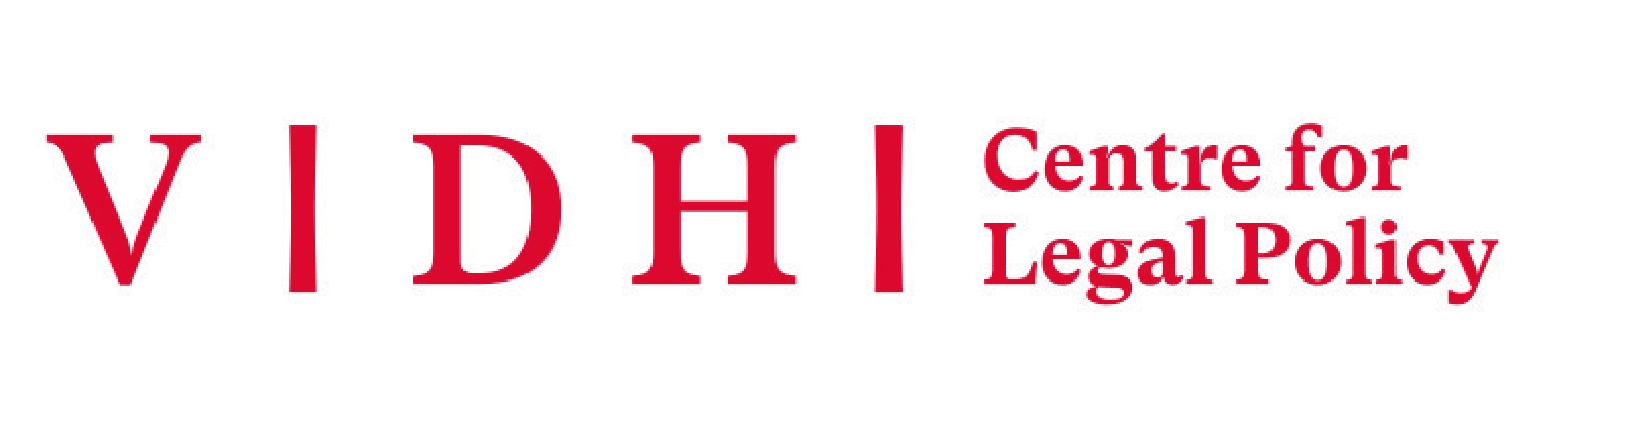 The Vidhi Centre for Legal Policy logo